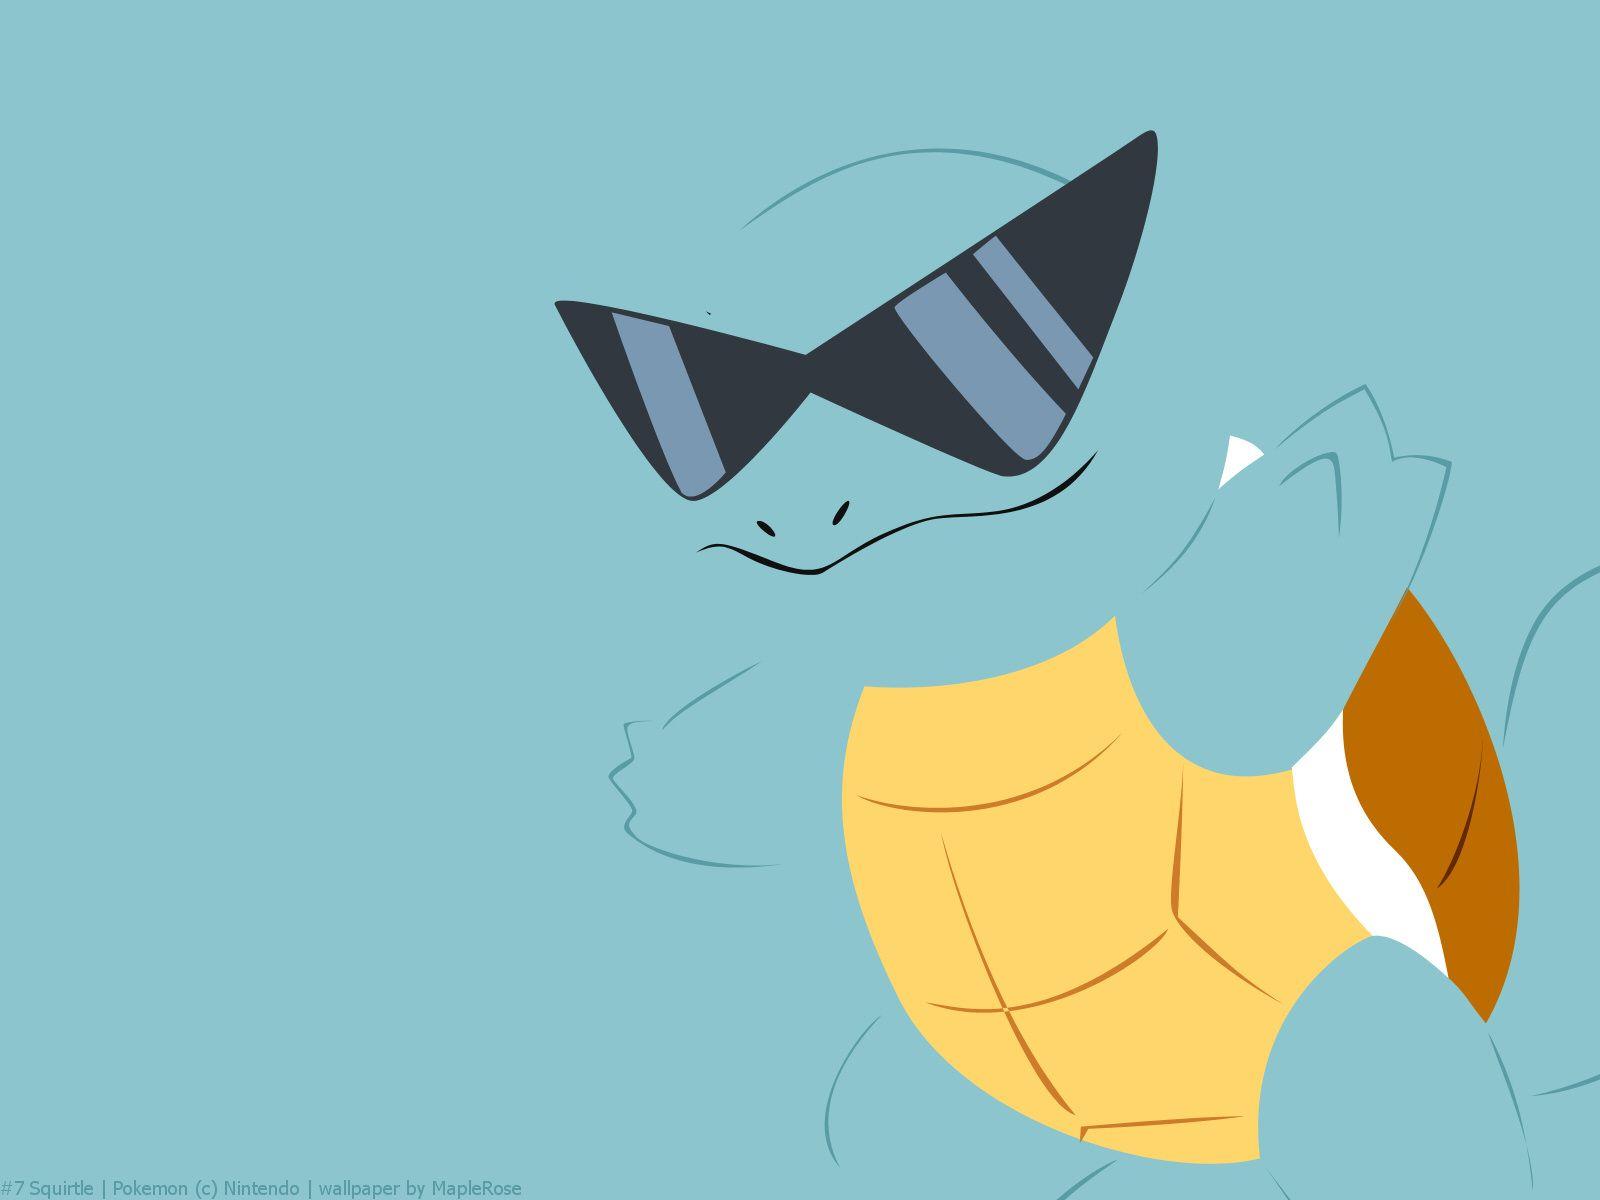 Squirtle with Glasses Wallpaper Free Squirtle with Glasses Background